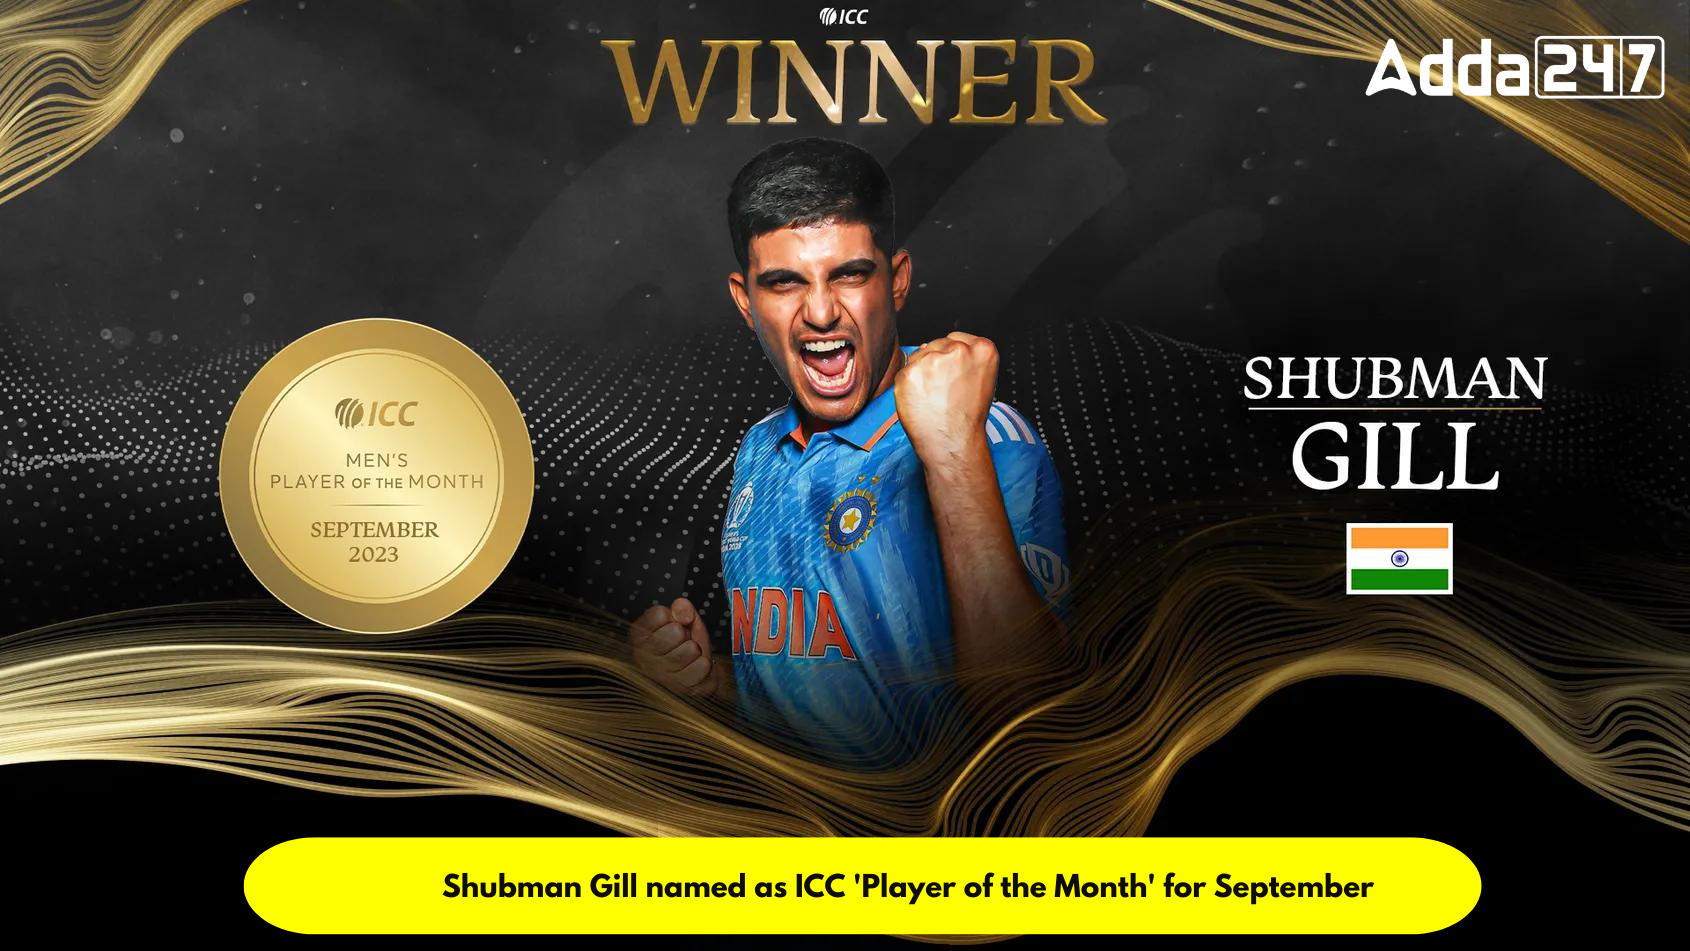 Shubman Gill named as ICC 'Player of the Month' for September